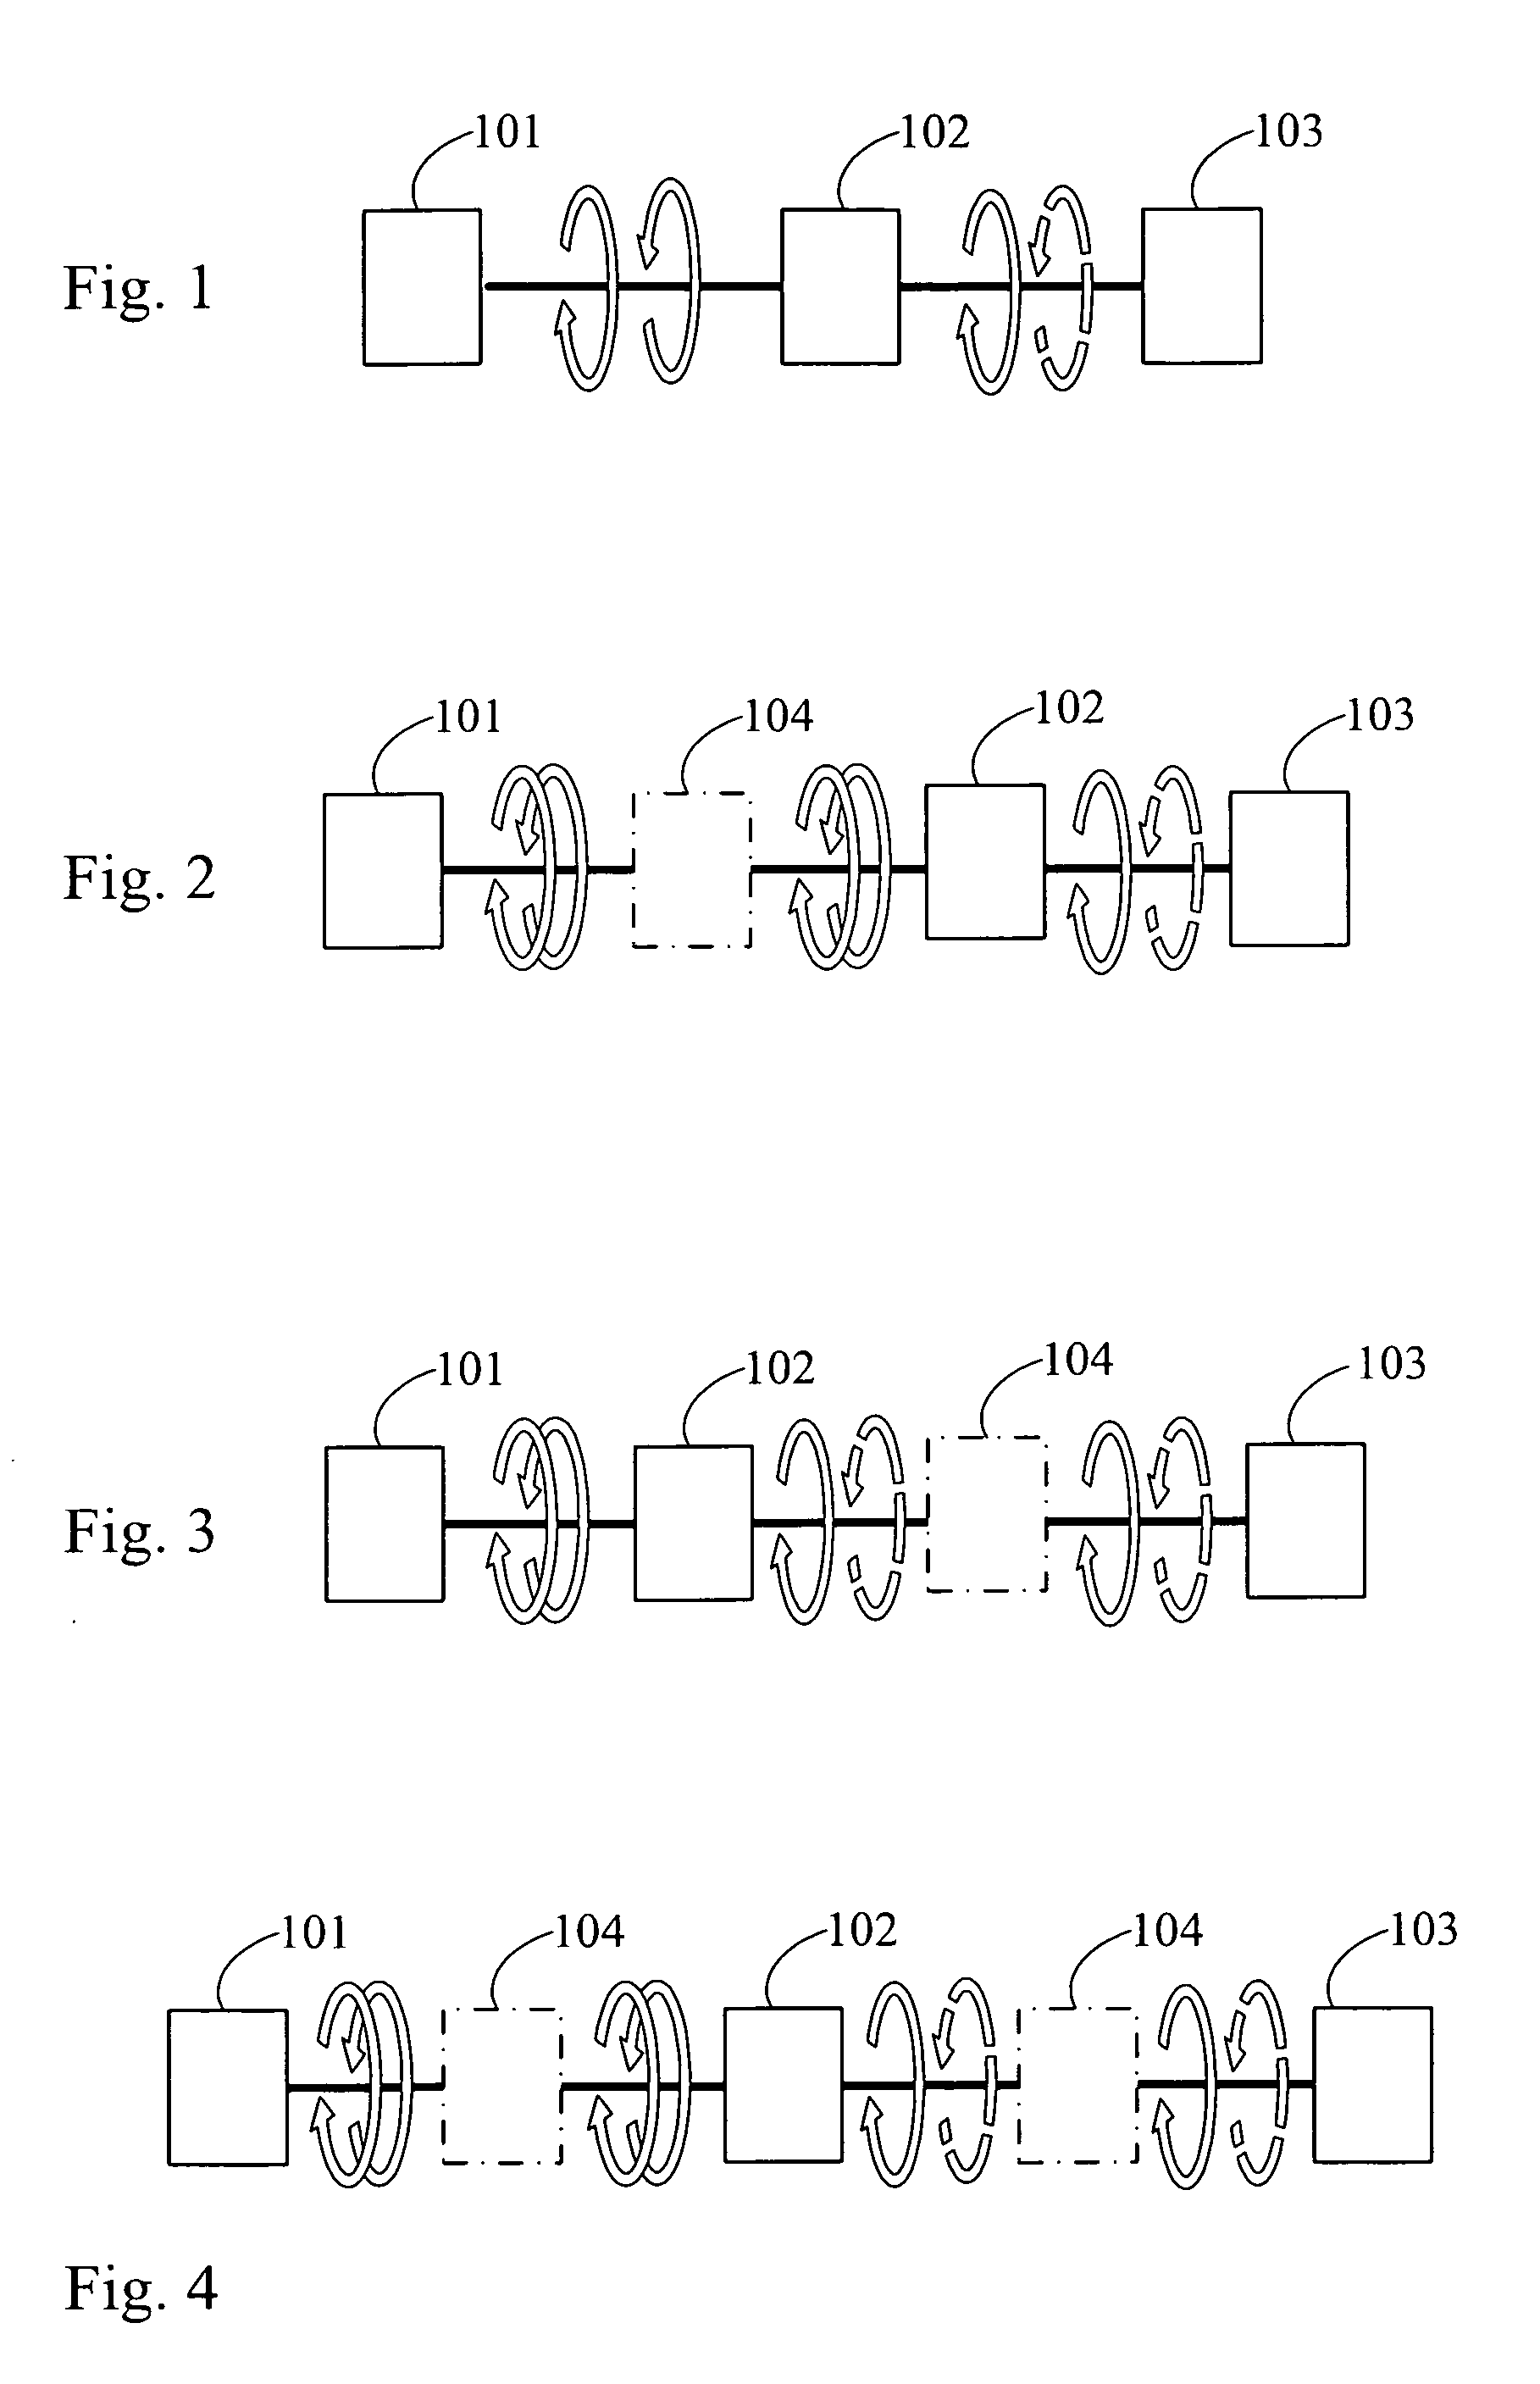 Bidirectional different speed ratio driving device with bidirectional manpower input